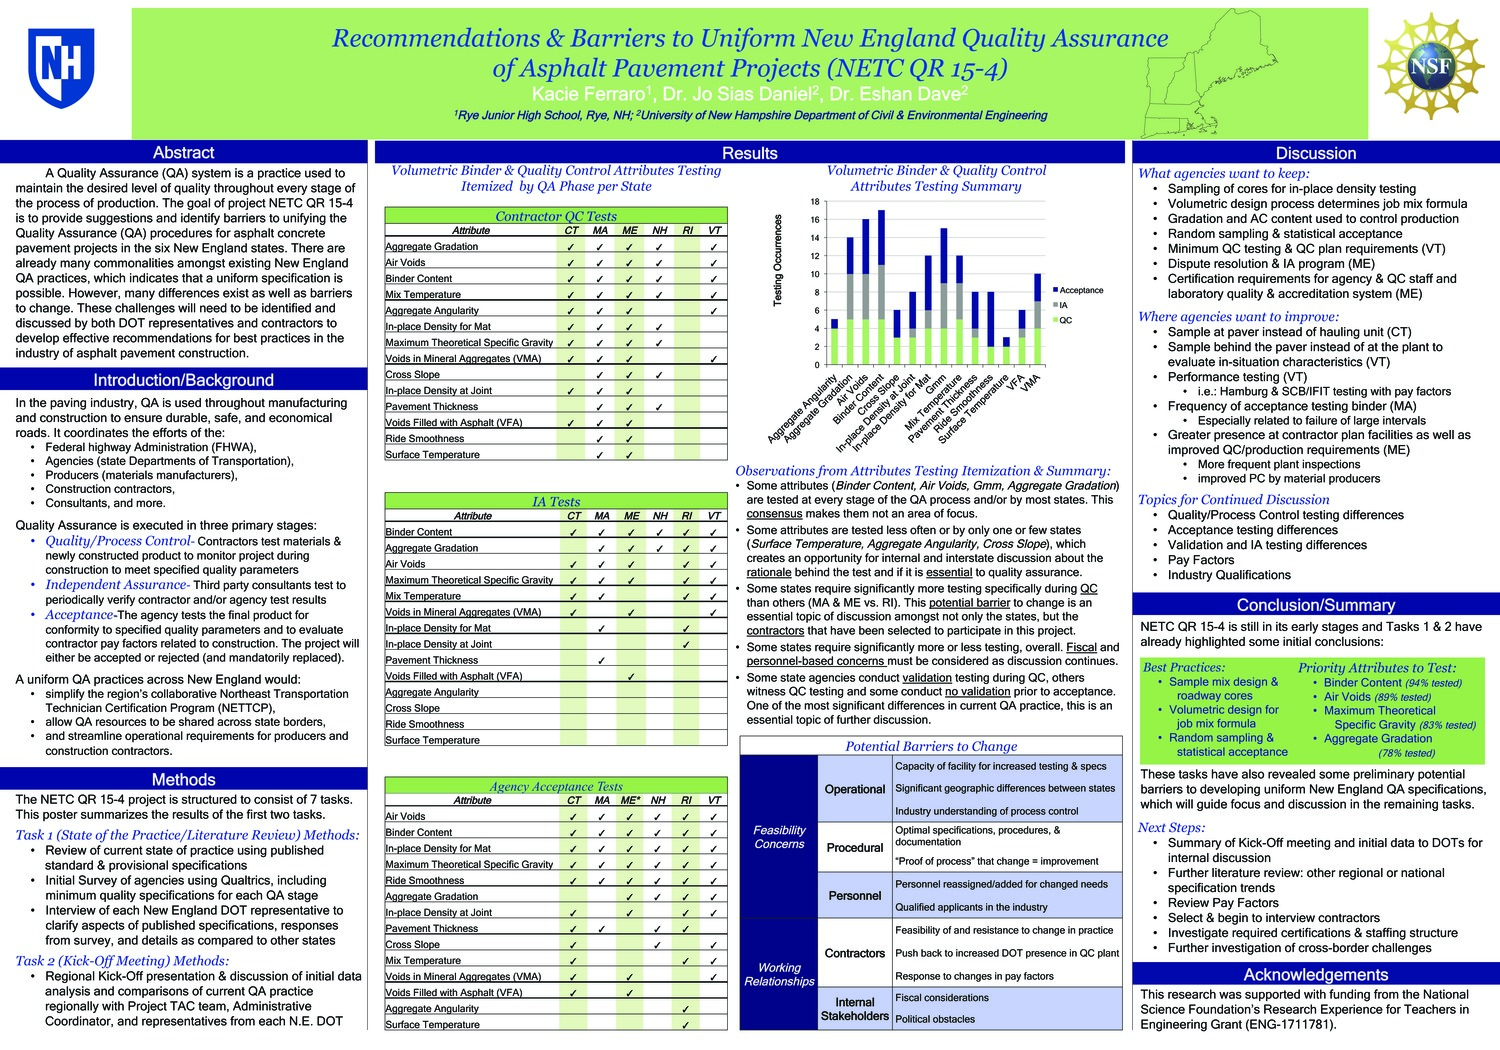 Recommendations & Barriers To Uniform New England Quality Assurance Of Asphalt Pavement Projects (Netc Qr 15-4) by knk5